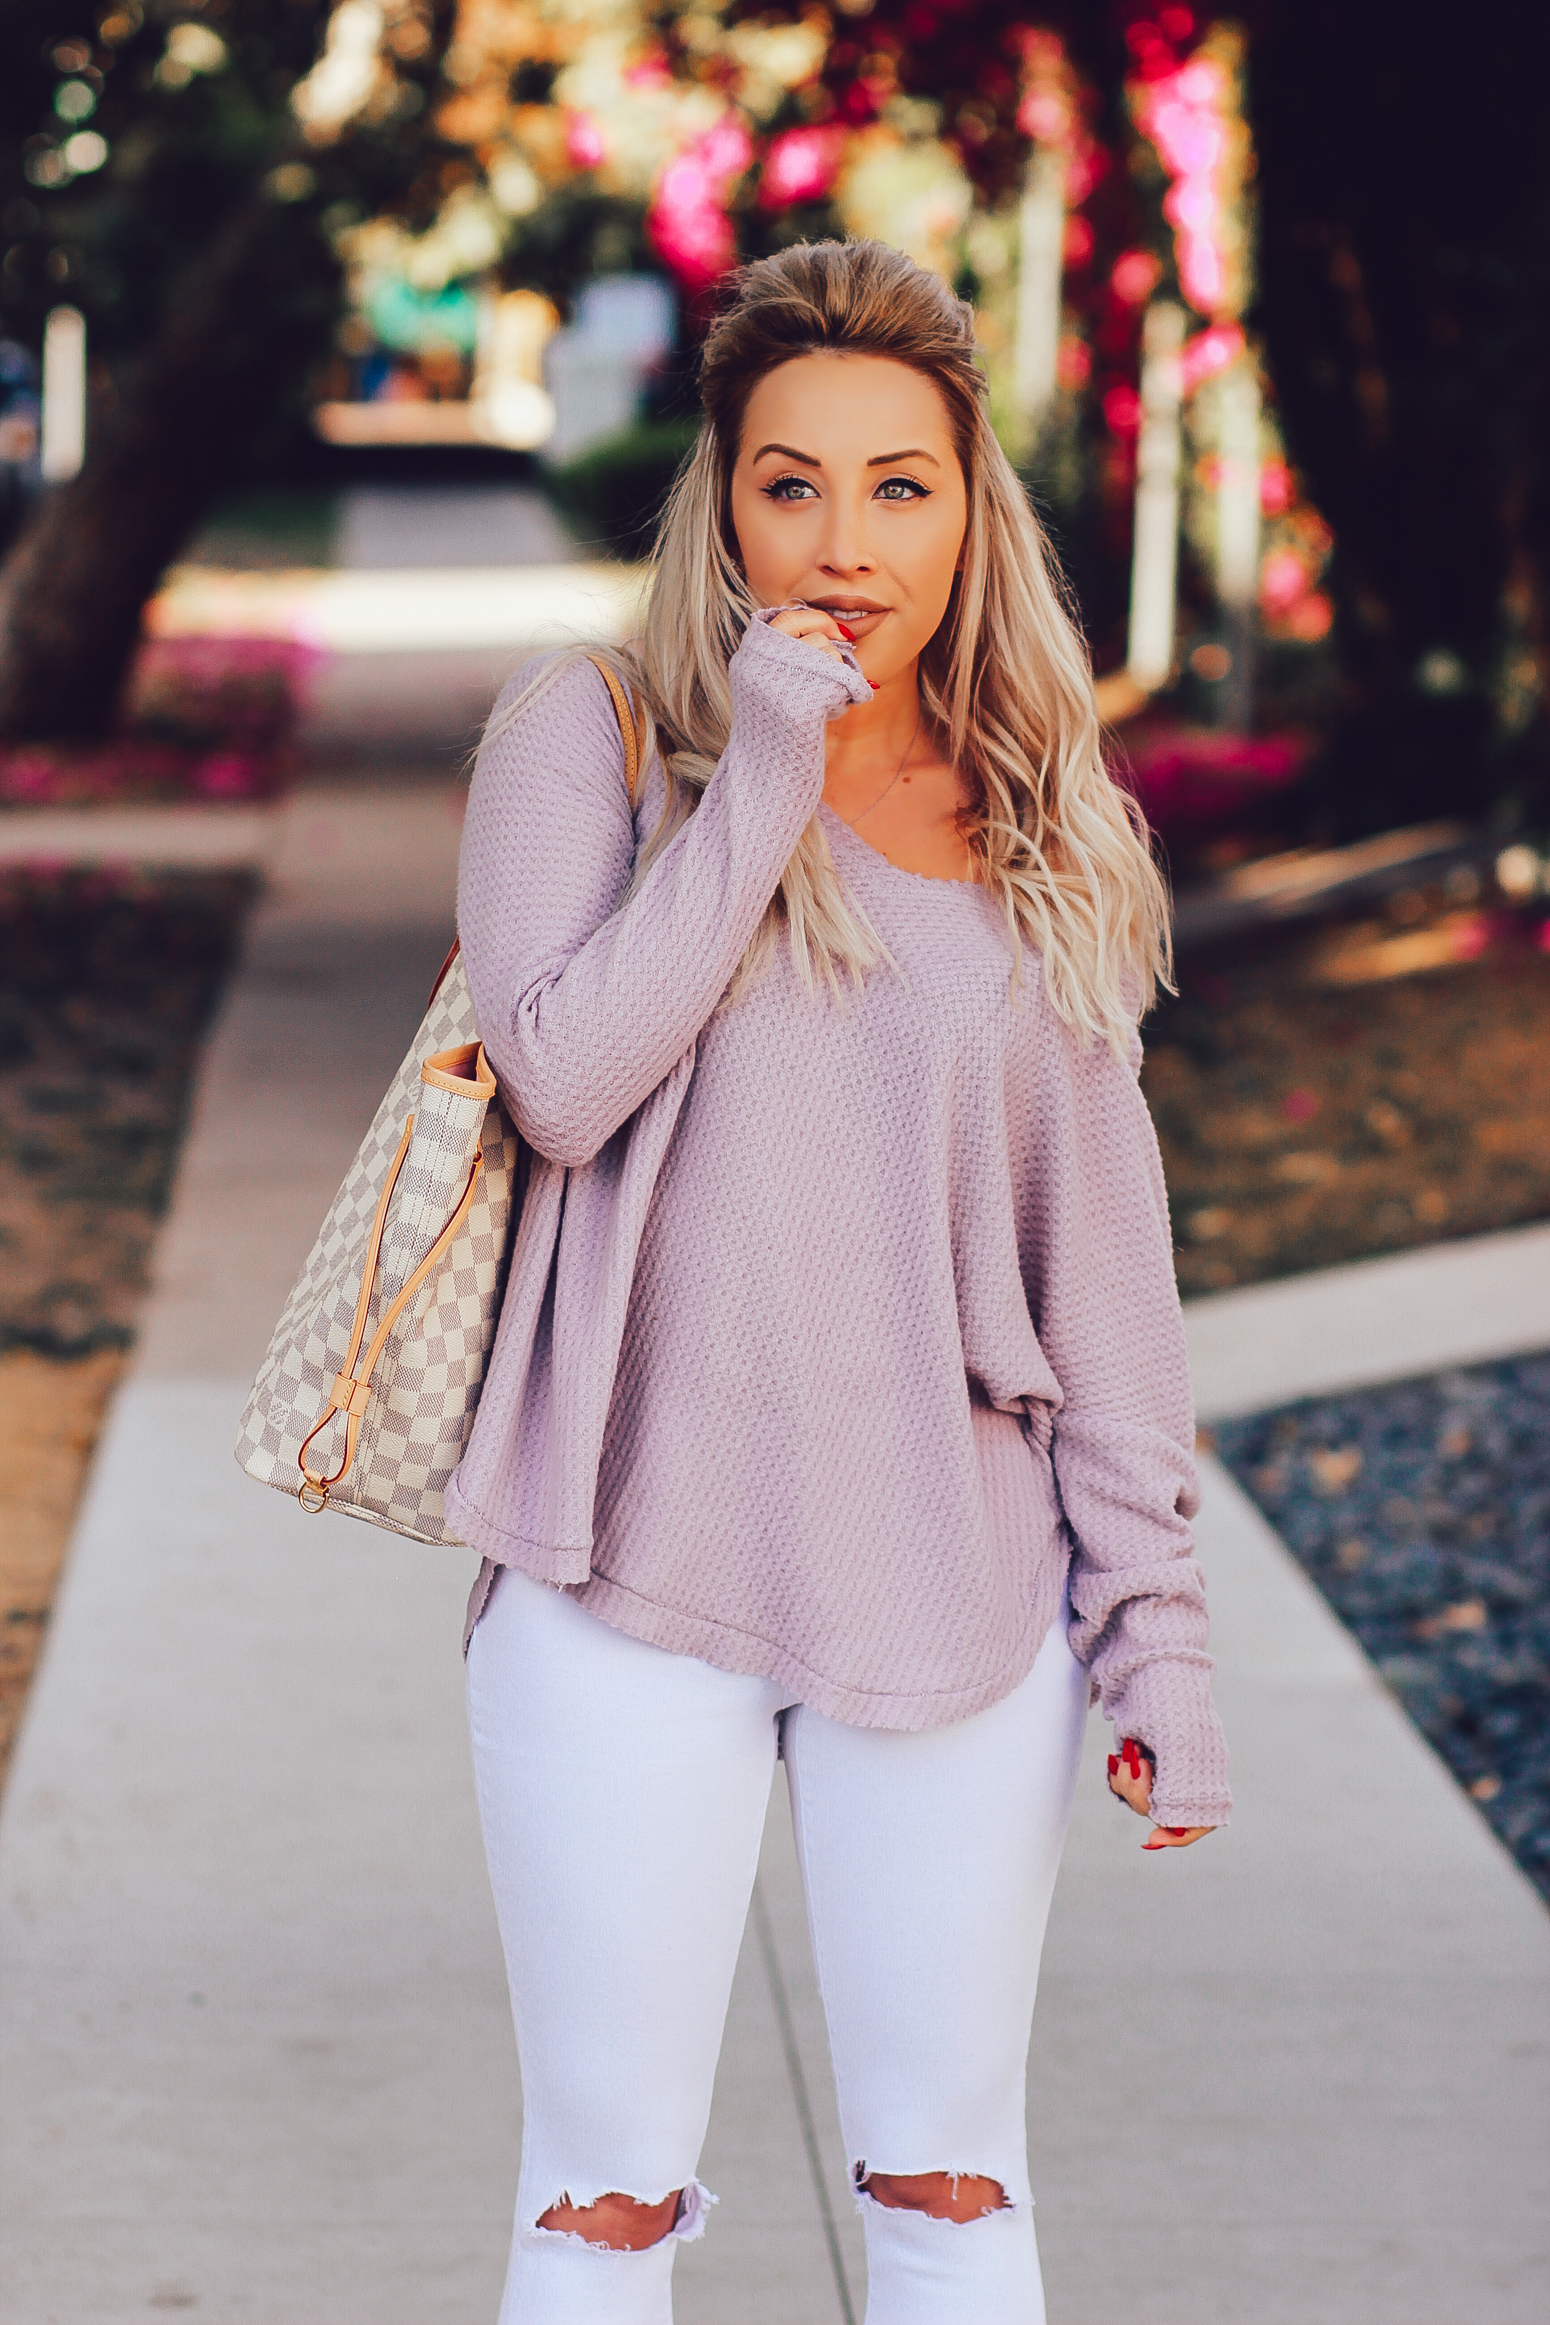 Blondie in the City" Urban Outfitters Violet Sweater | Ripped White Jeans